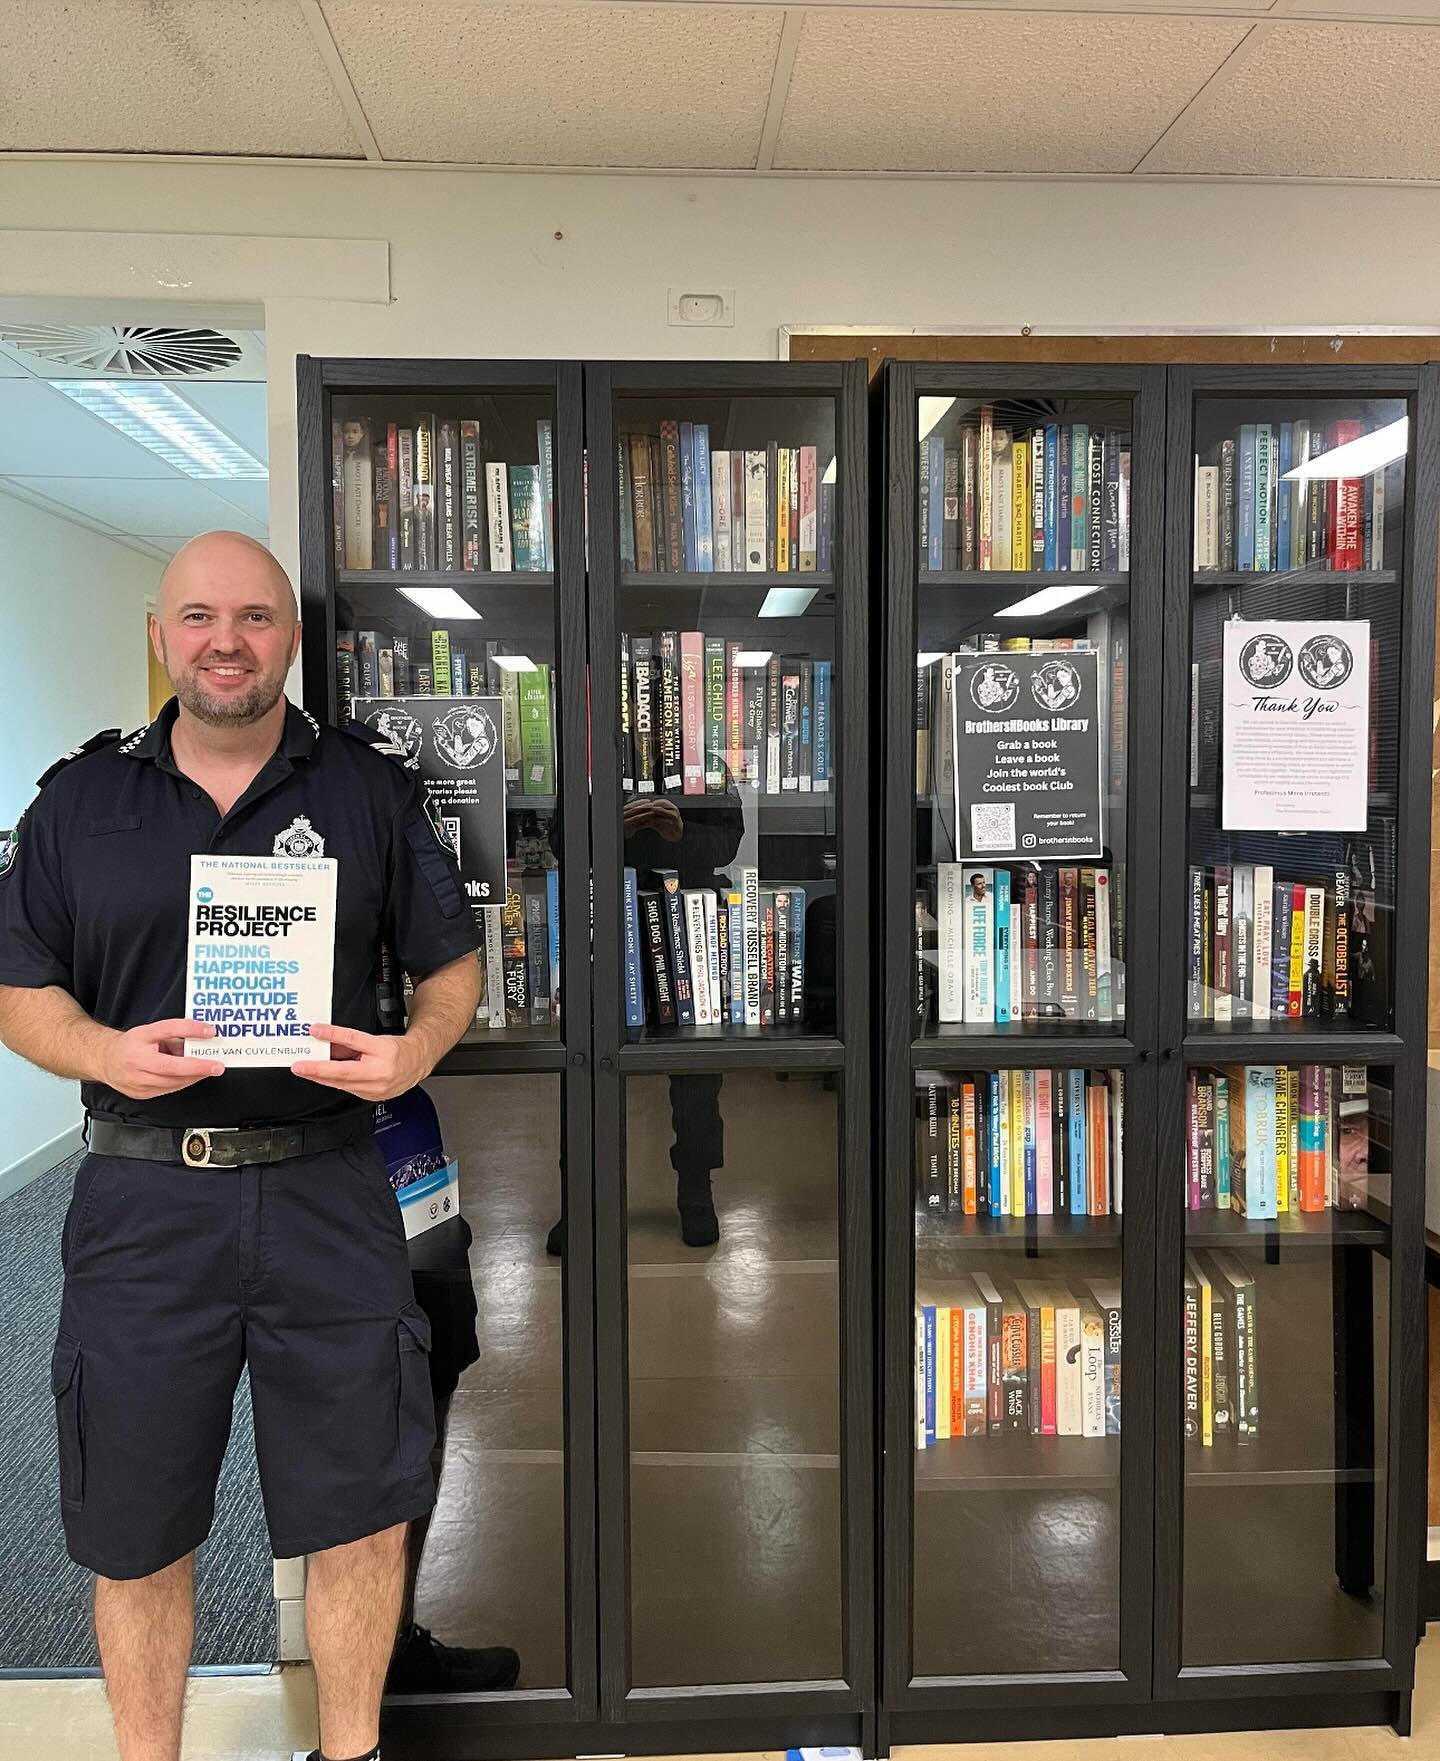 📚 LIBRARY UPGRADE 📚 

A message from the Broadbeach police station.

&ldquo;Good morning Brothers and Books, just wanted to share with you that my OIC was so impressed with the new book shelf and the positive morale it created around the station th